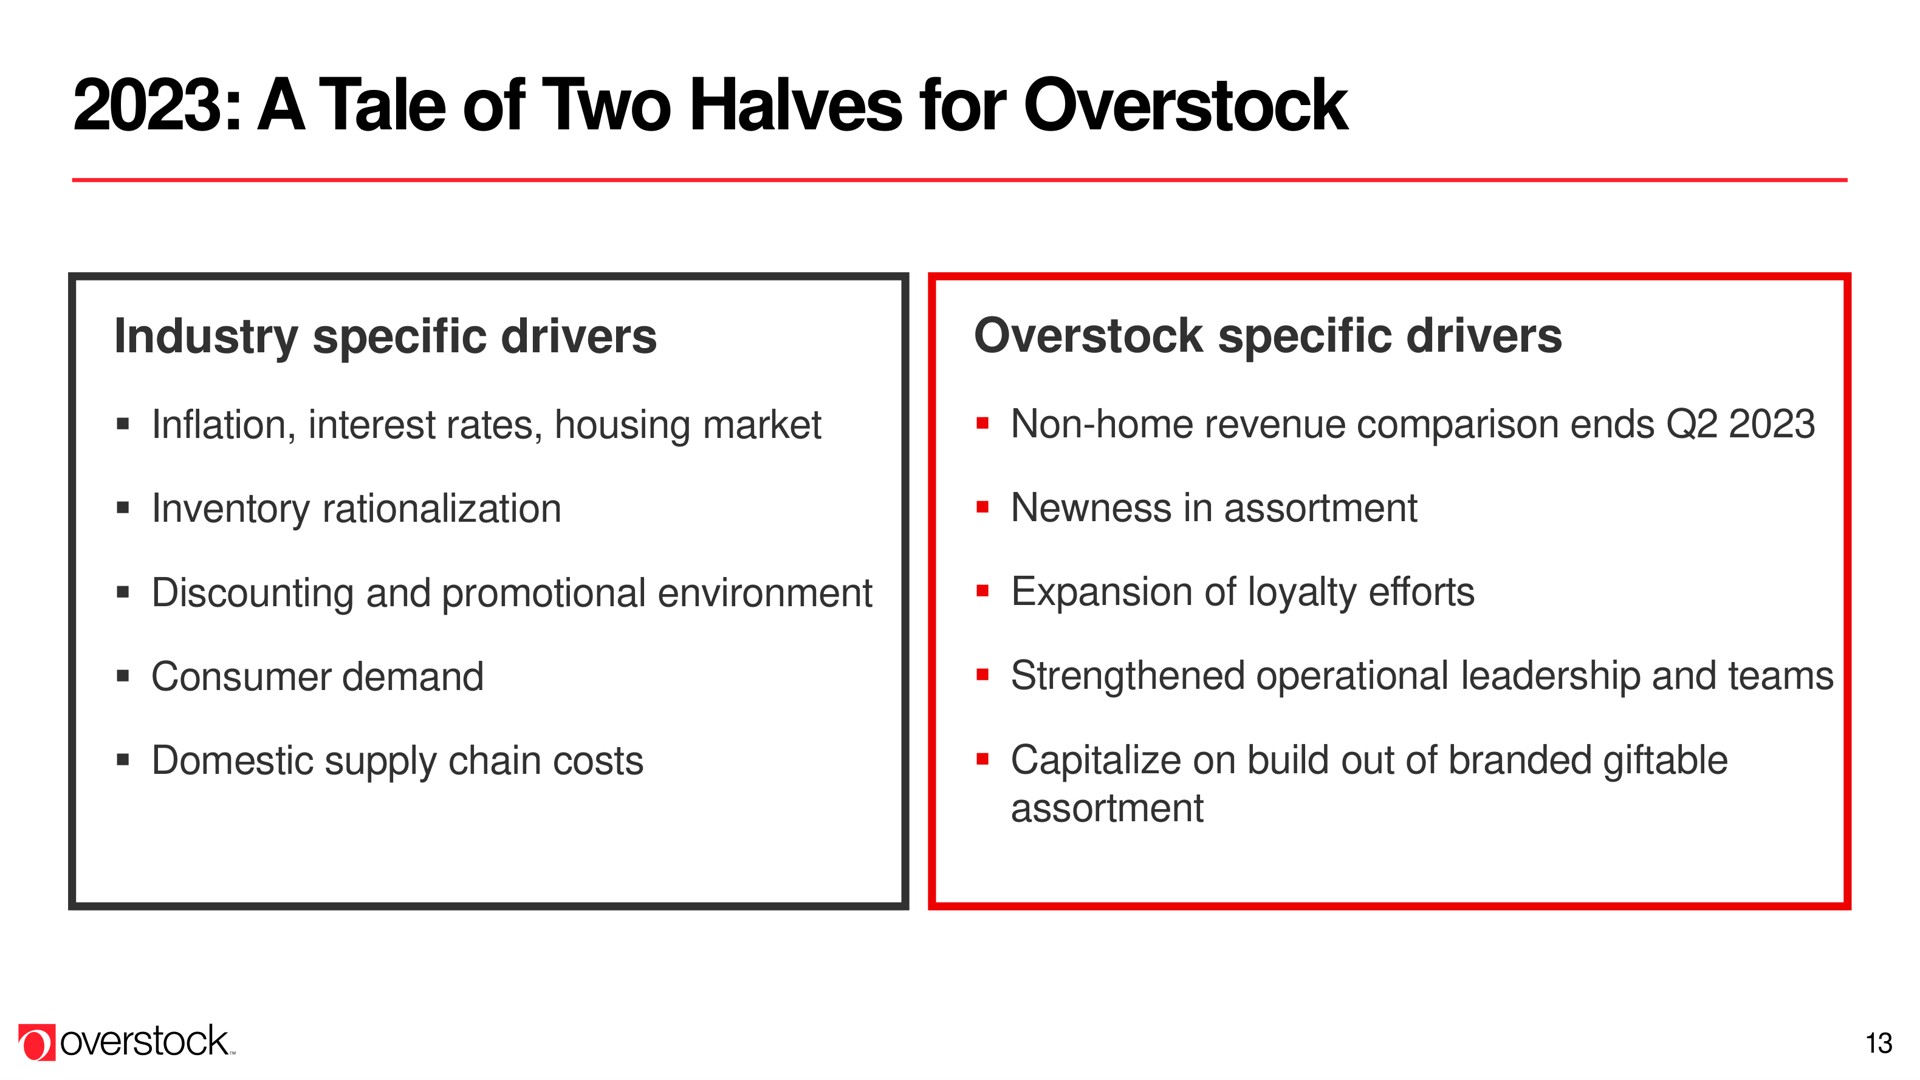 a tale of two halves for overstock | Overstock